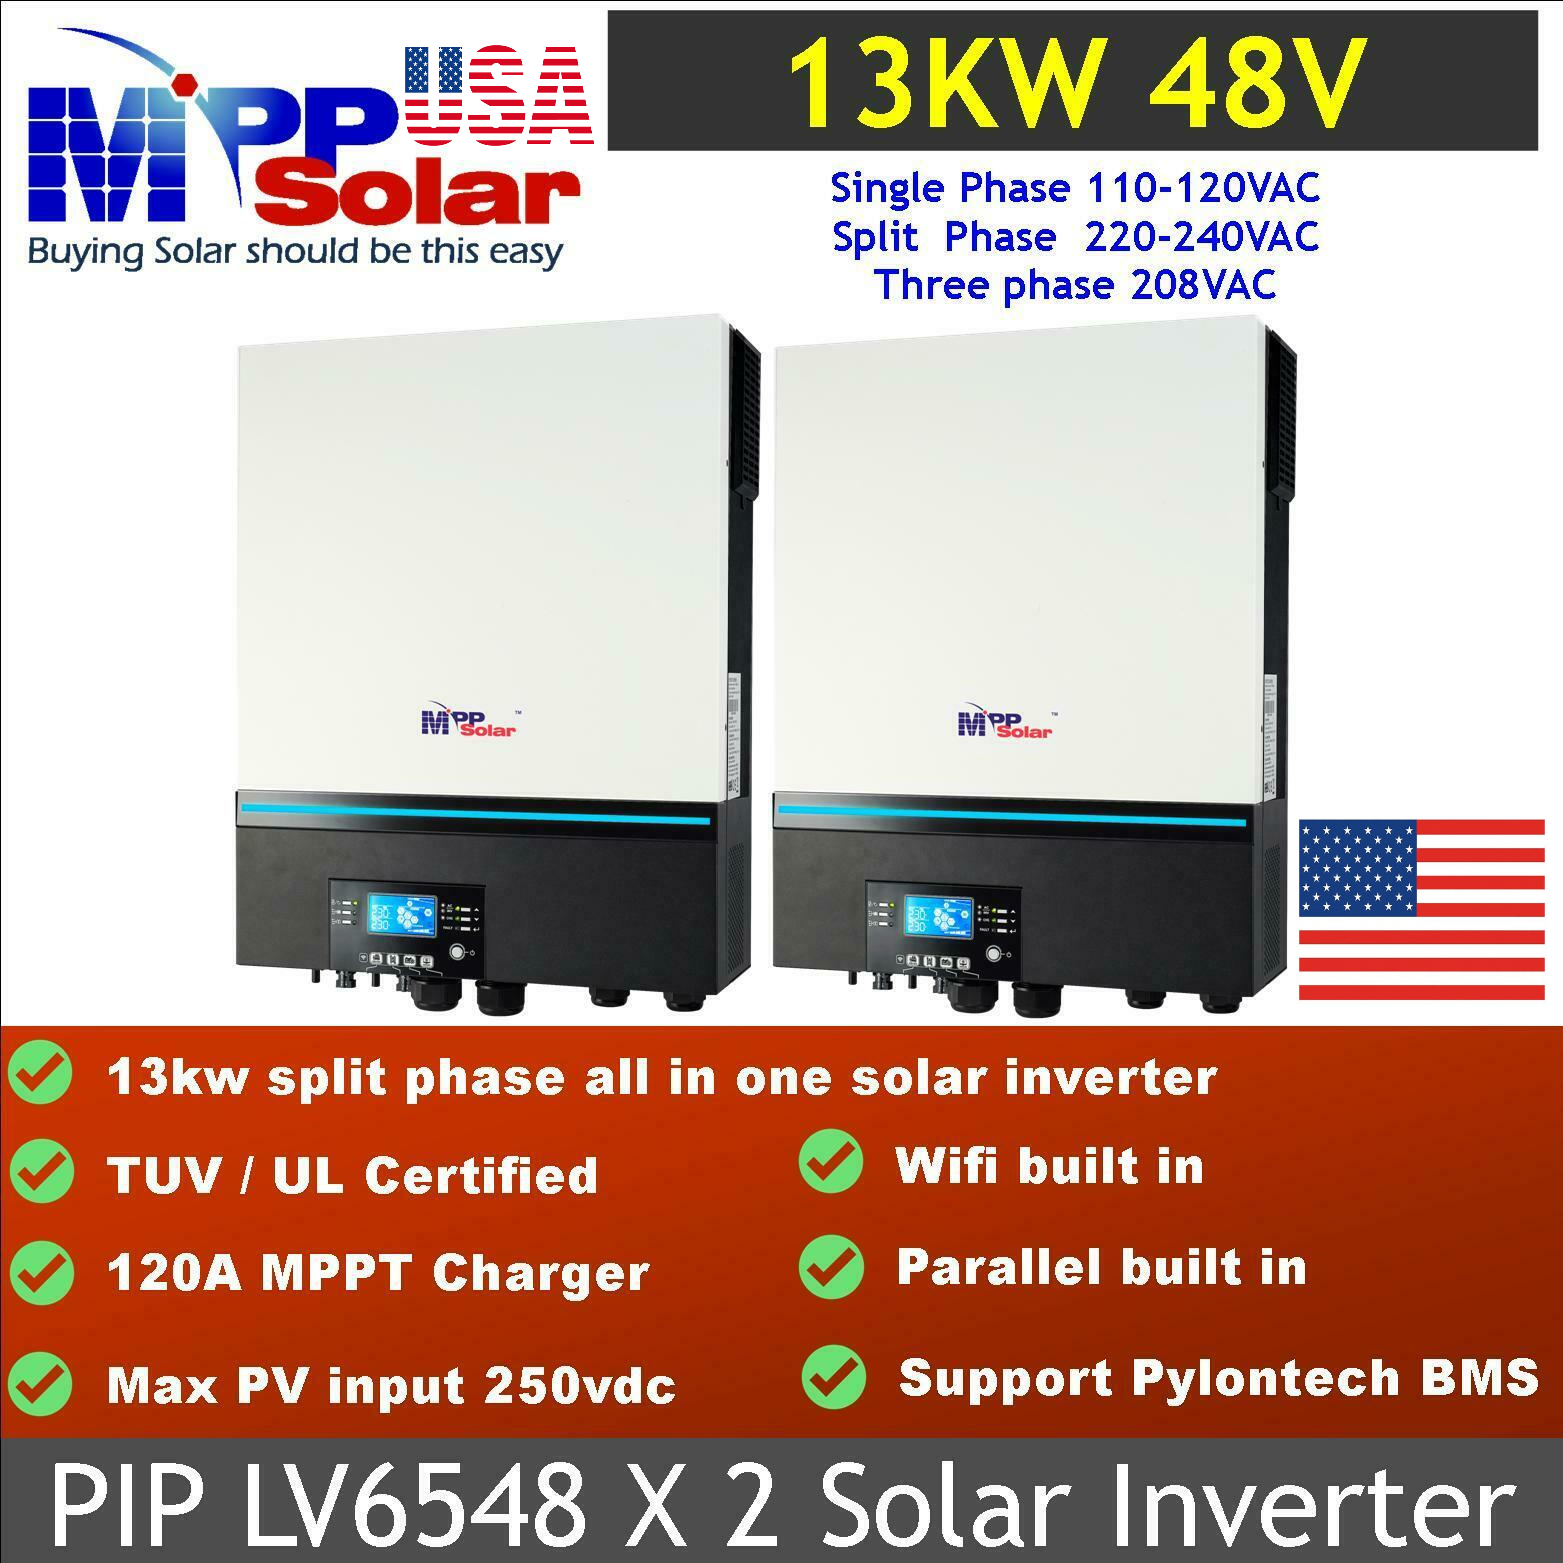 offdgrid: this Mpp LV6548 has essentially 2 mppt controllers in the all-in- one. Each side can accept 4000w (250VOC)for a total of 8000w .I have 10-  455w panels. My question is could one mppt do 6 panels (3s2p) and the mppt  side do 4 panels (2p2s)? The